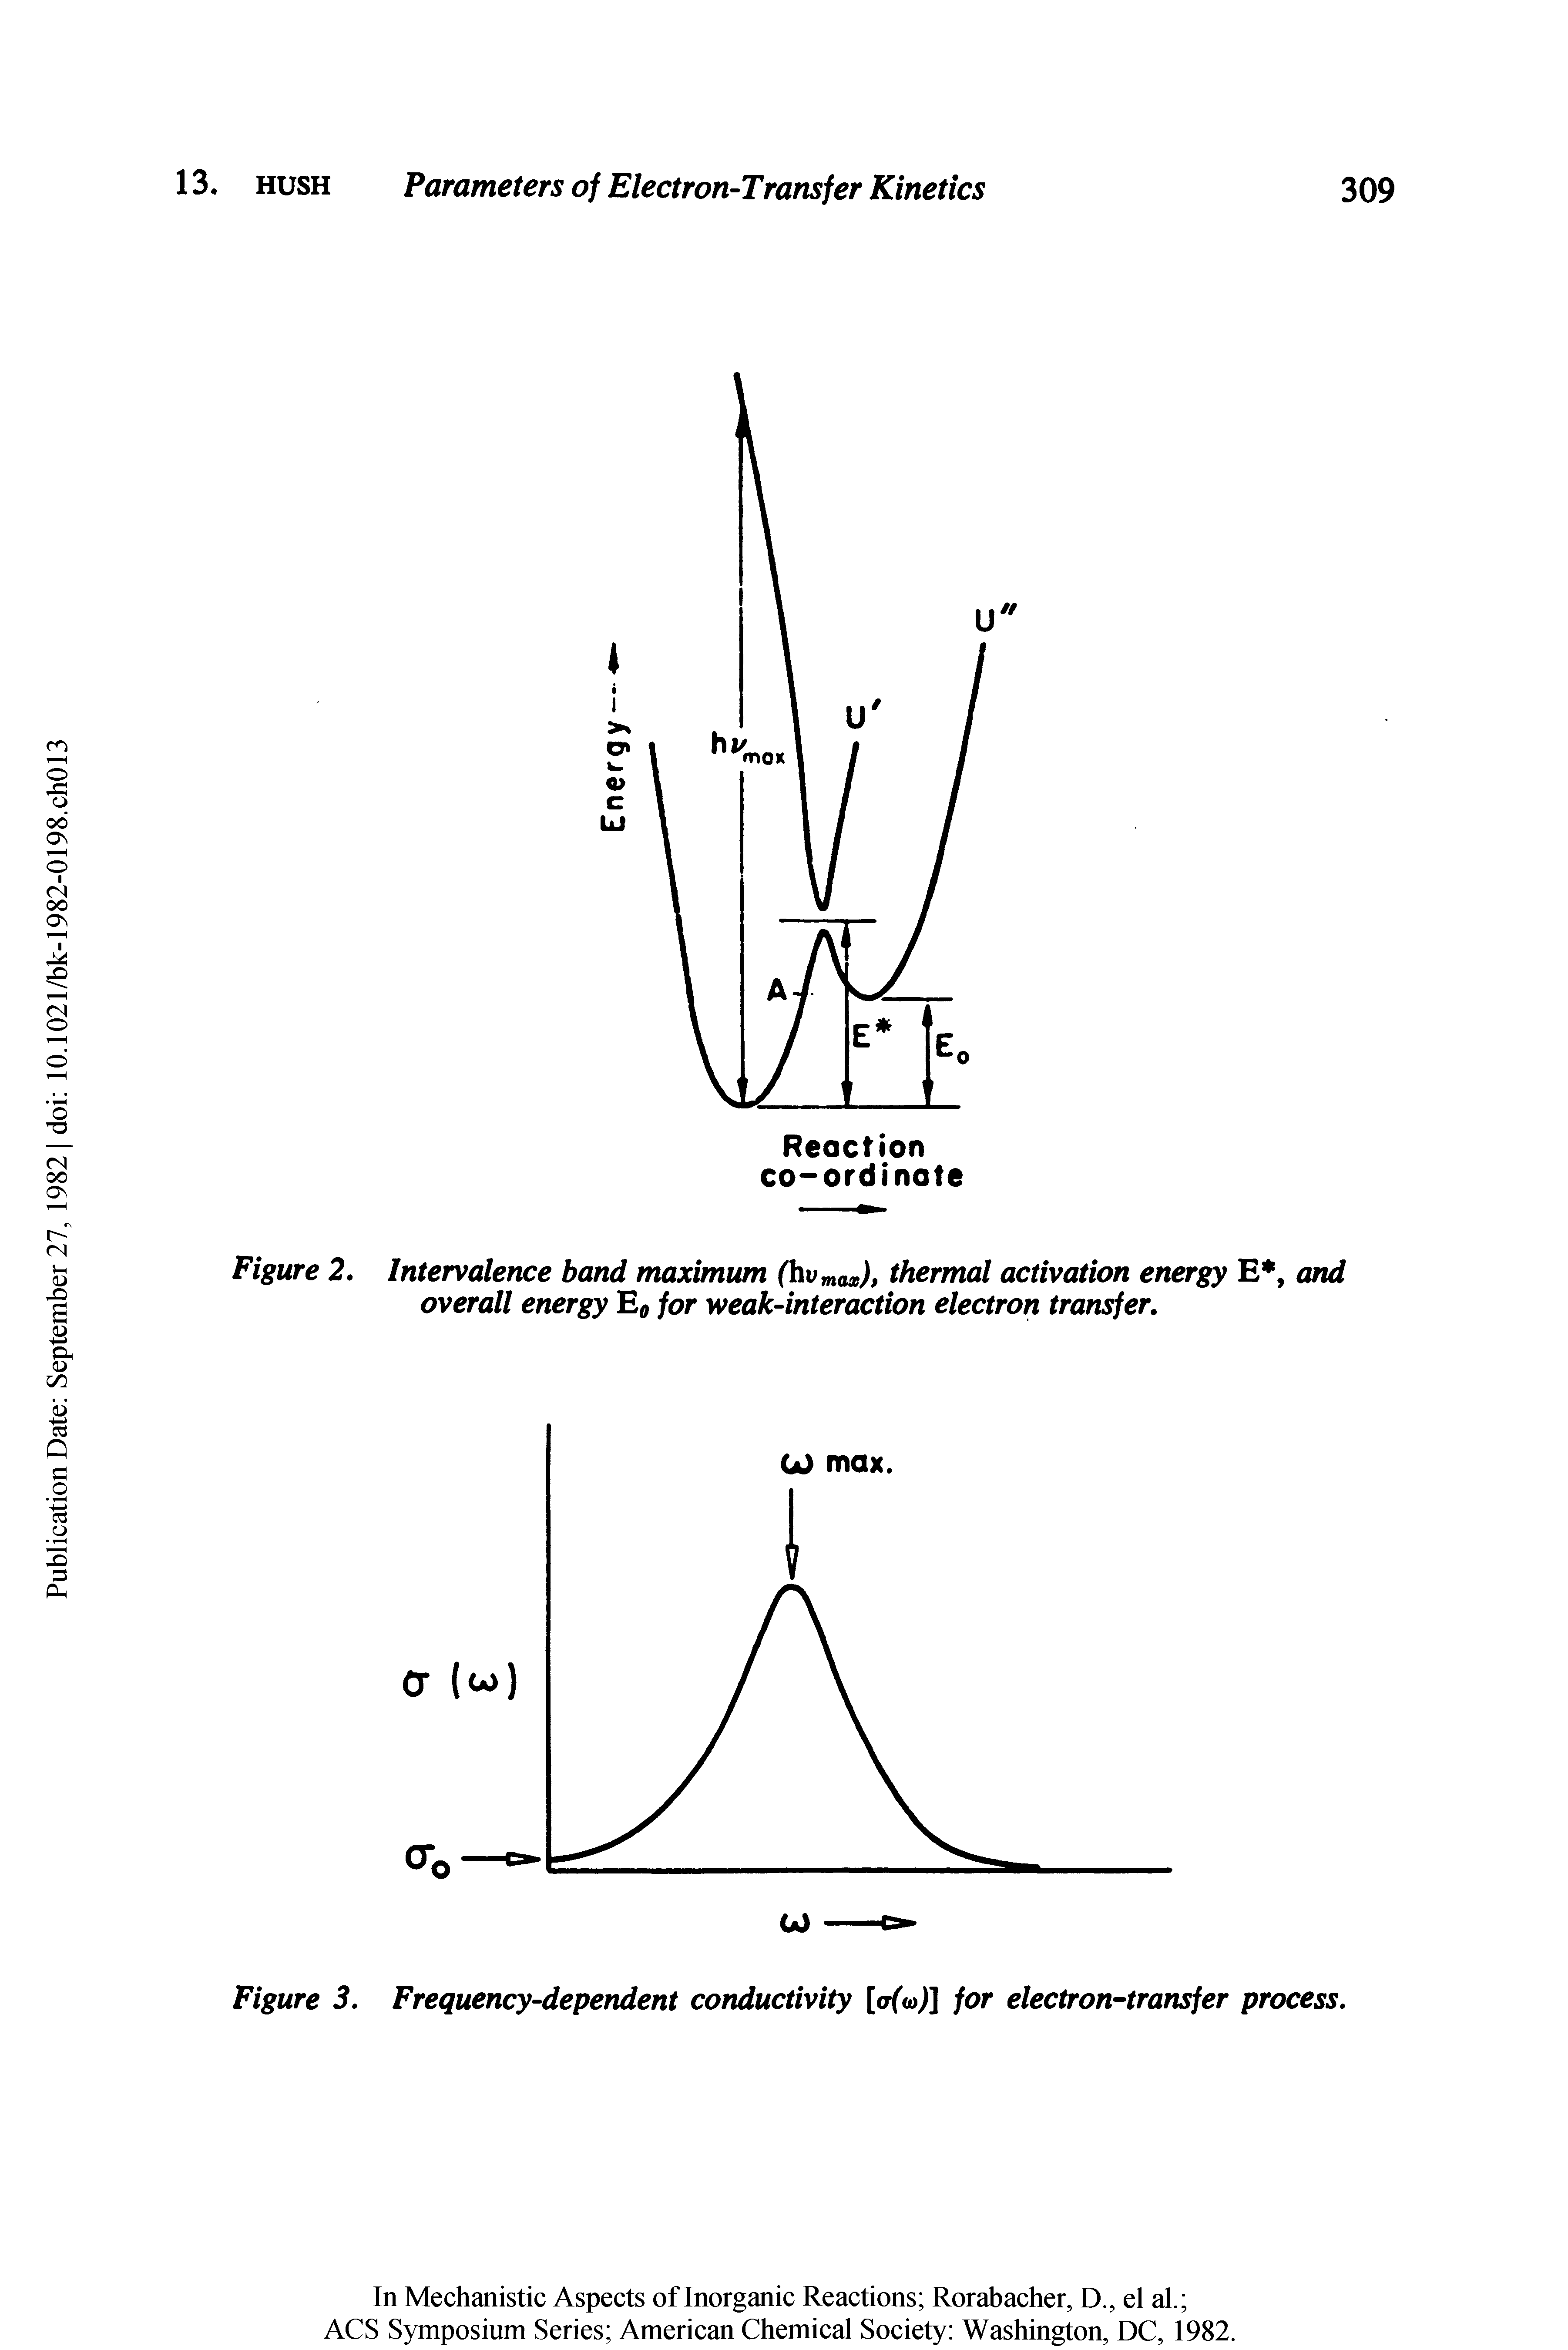 Figure 3. Frequency-dependent conductivity [oM] for electron-transfer process.